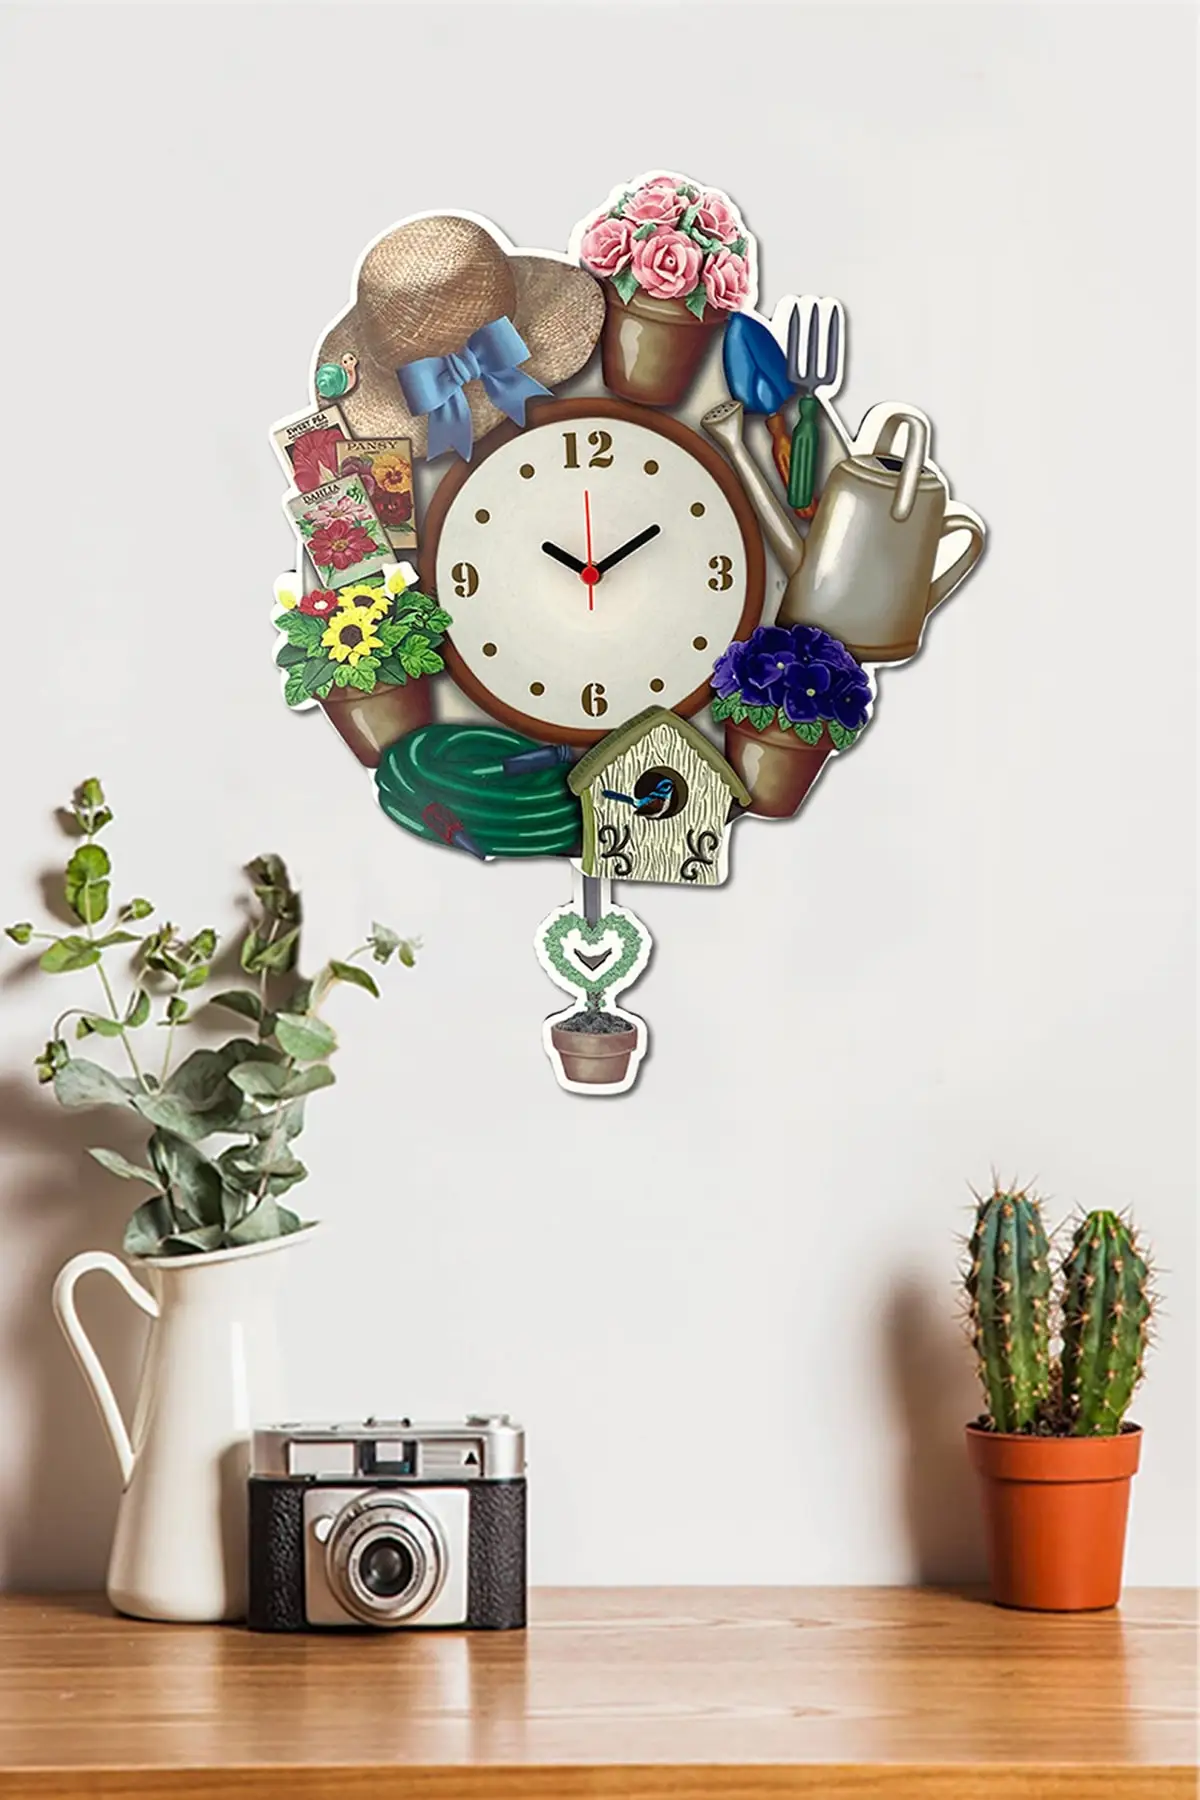 Garden World Swinging Pendulum Wall Clock Home and Wall Decoration, Decorative Objects Giftable, Colorful Walls, Free Shipping